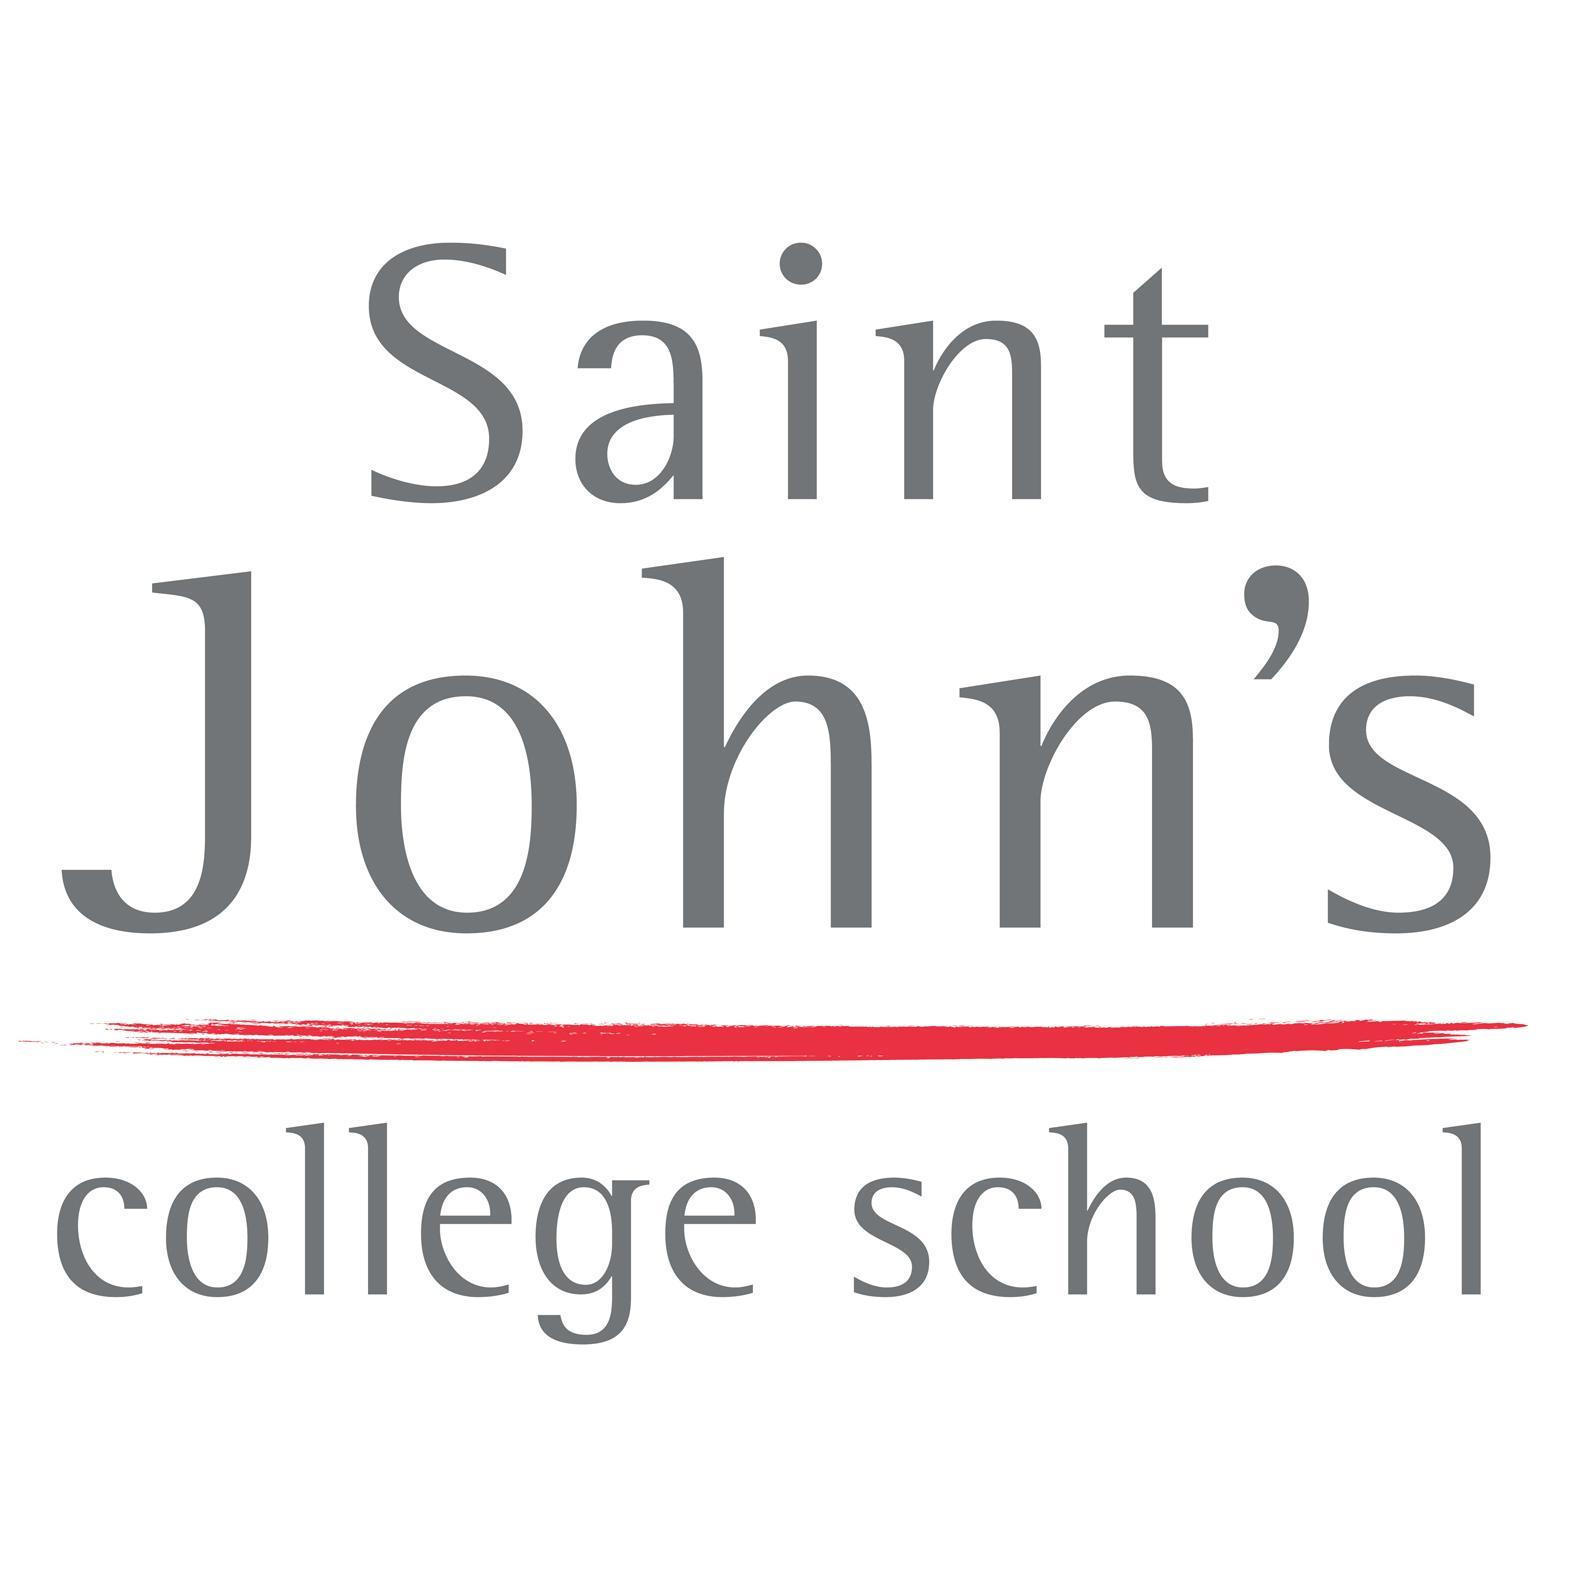 St John's College School, Cambridge is an independent school for boys and girls aged 4-13.